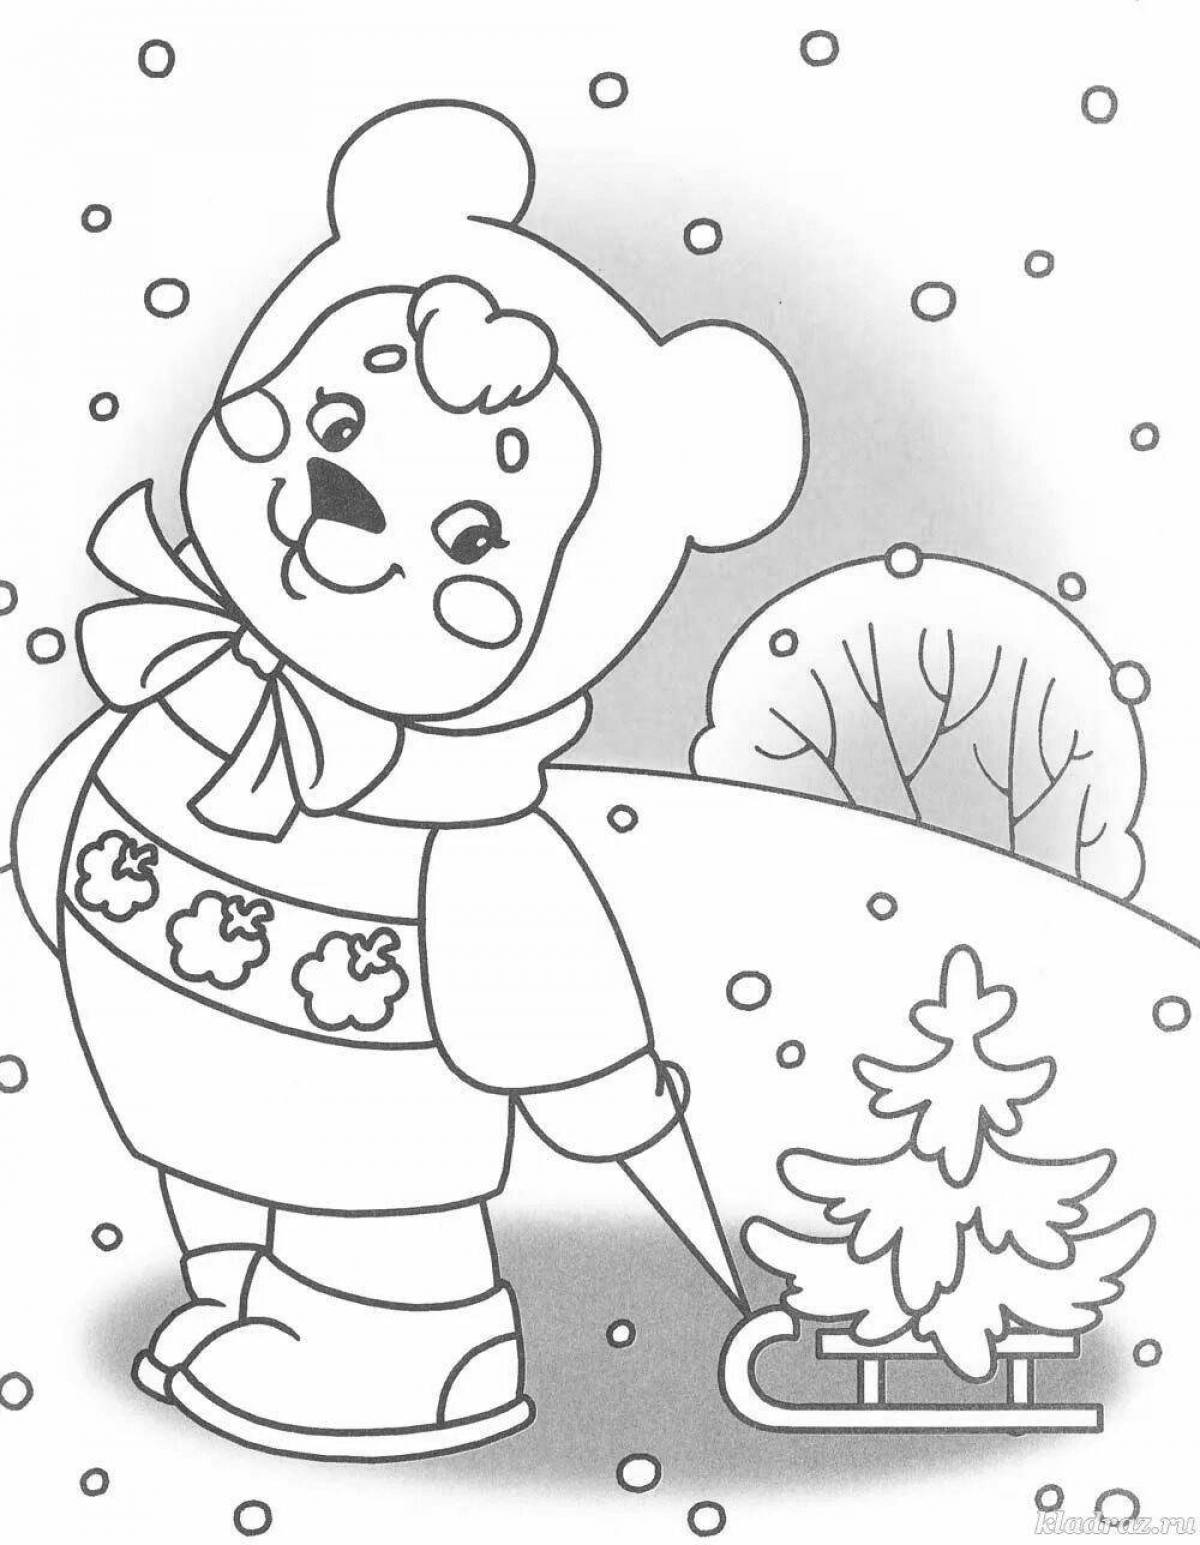 Outstanding winter coloring book for 2-3 year olds